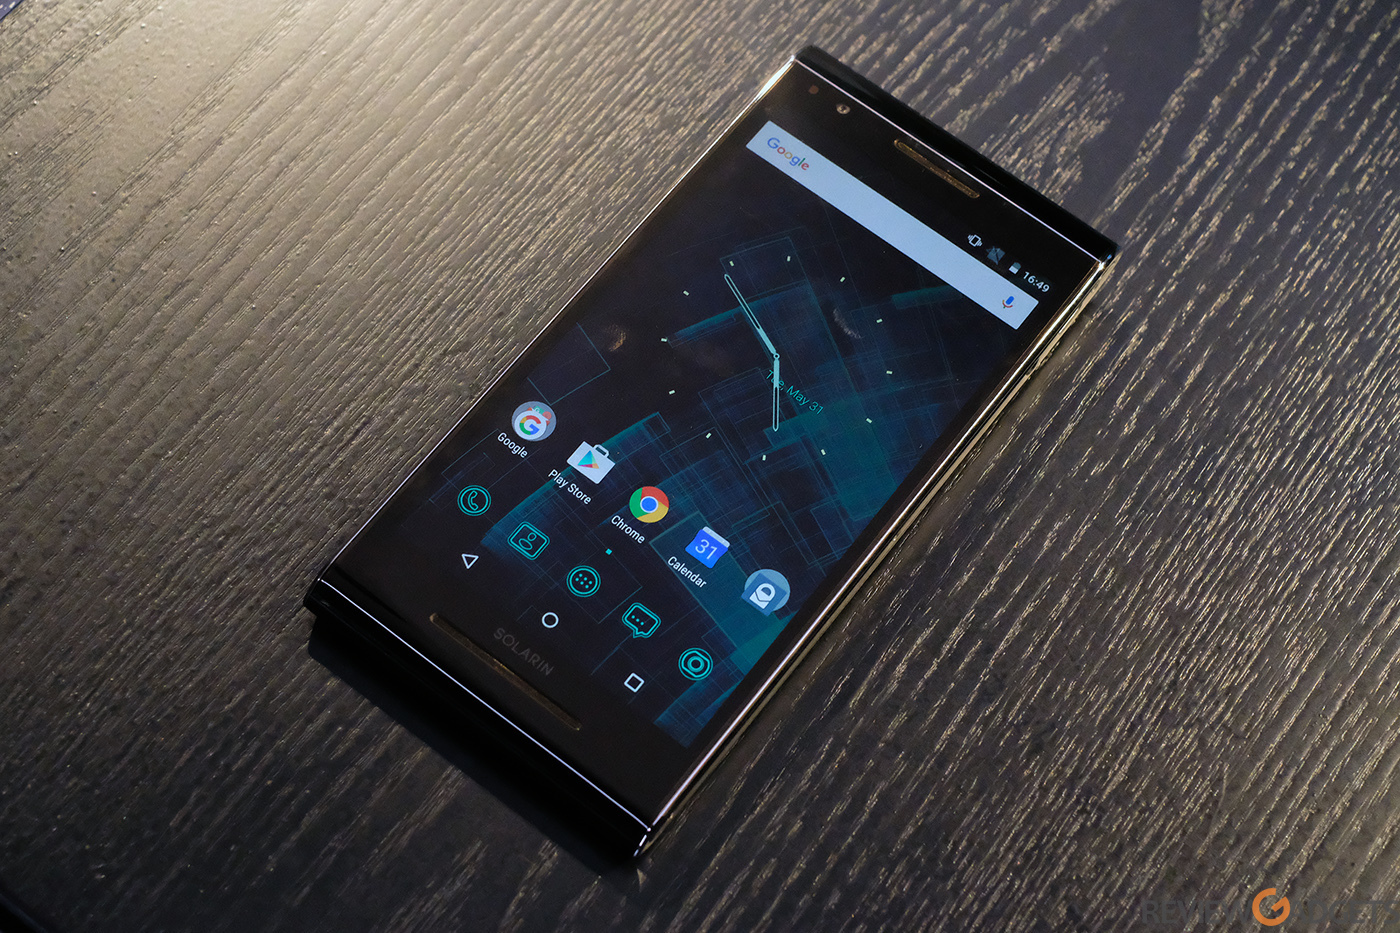 Solarin The most expensive smartphone